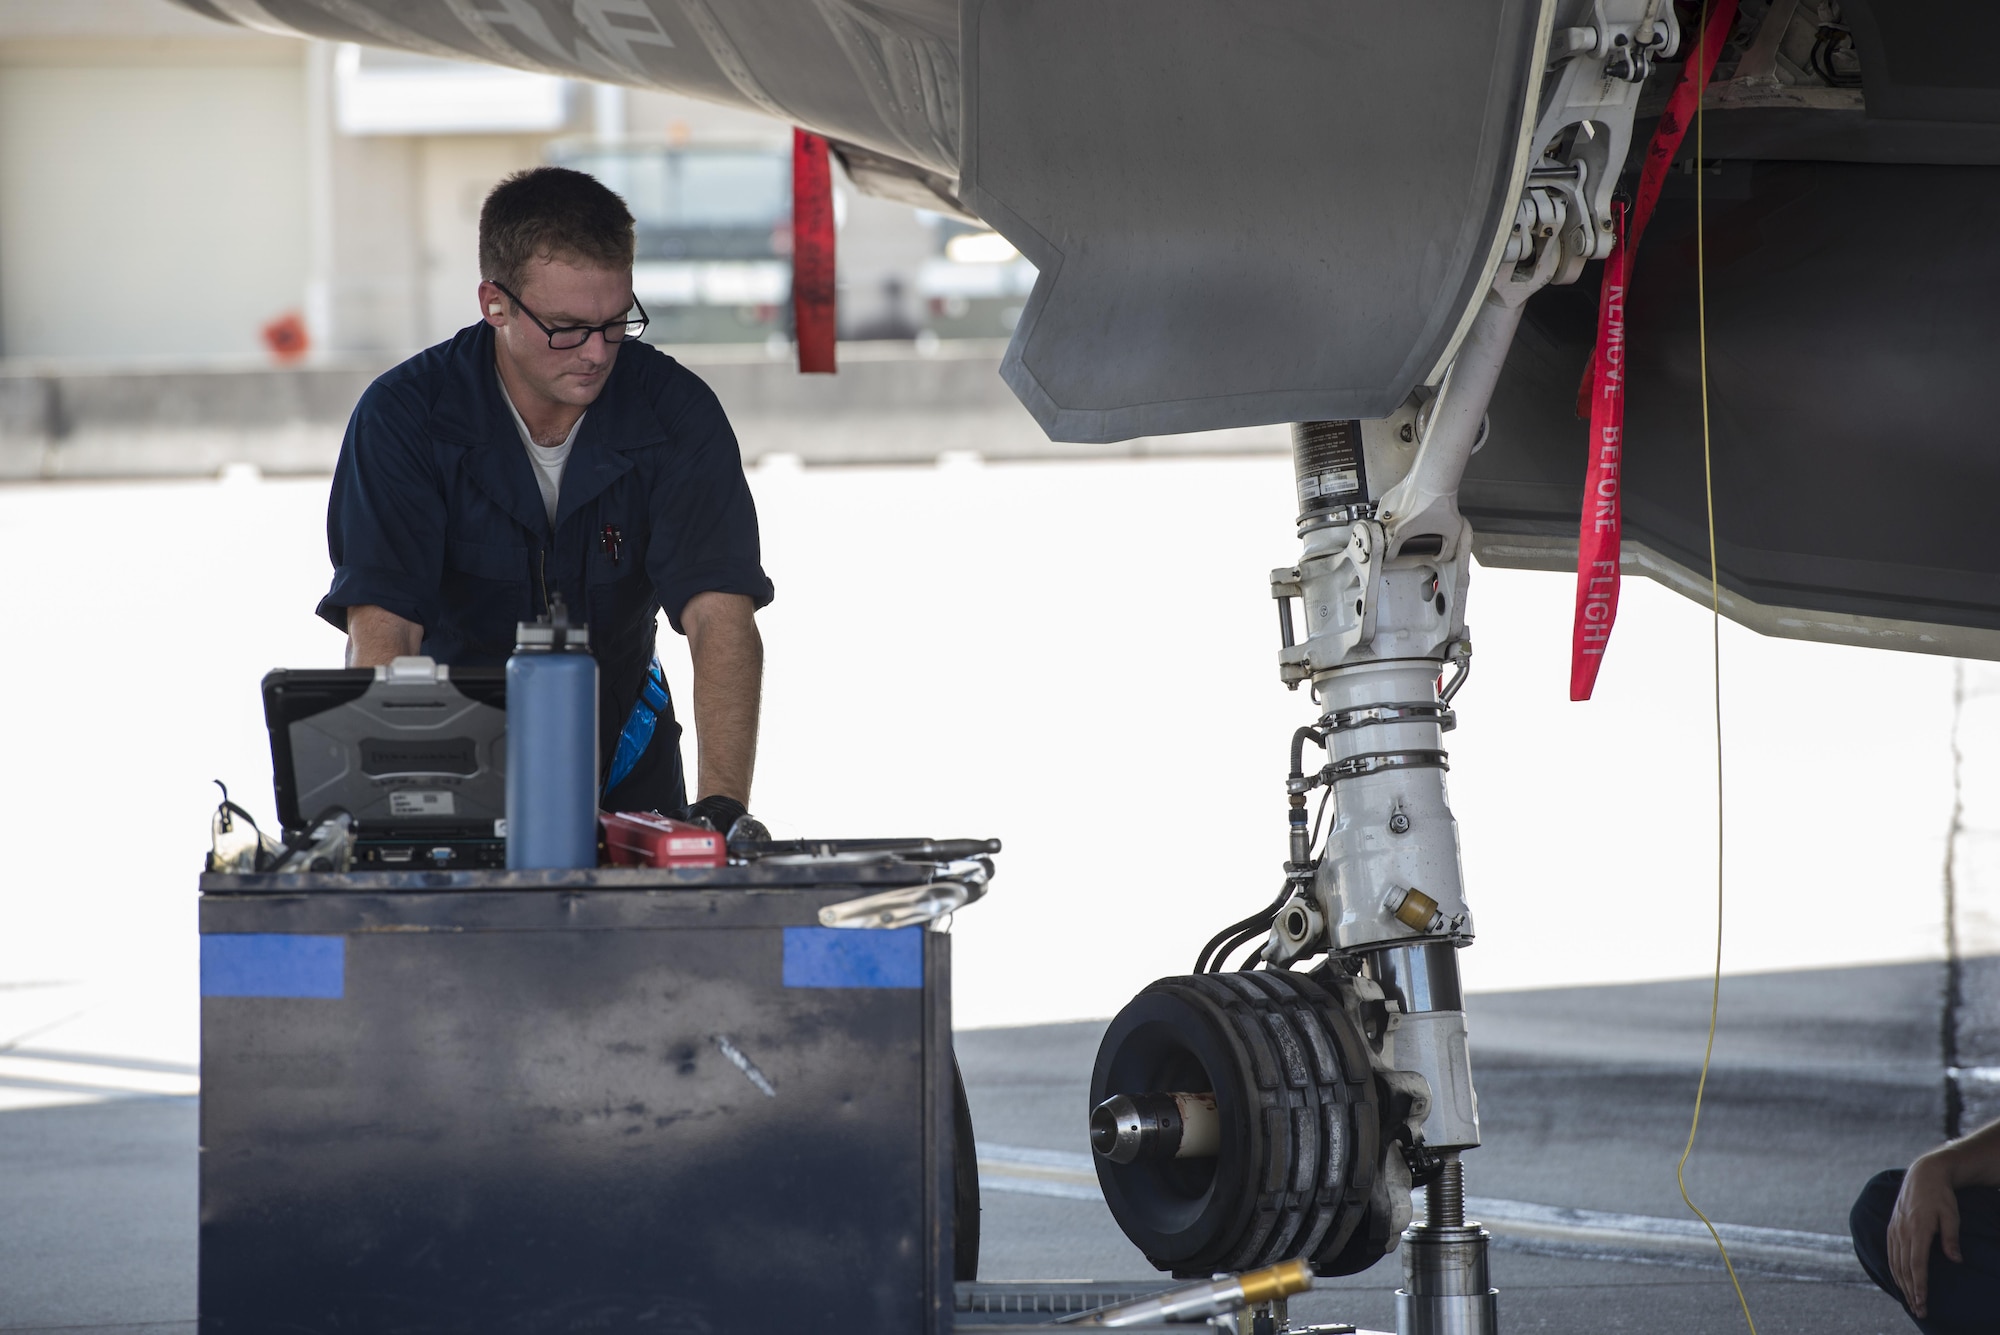 Staff Sgt. Joshua Davlin, 58th Aircraft Maintenance Unit crew chief, services an F-35A wheel Aug. 2, 2016, at Eglin Air Force Base, Fla. During the Aug. 1-3 sortie surge 58th AMU Airmen kept up with the high-tempo demand to provide safe and reliable aircraft for 111 sorties. (U.S. Air Force photo by Senior Airman Stormy Archer)